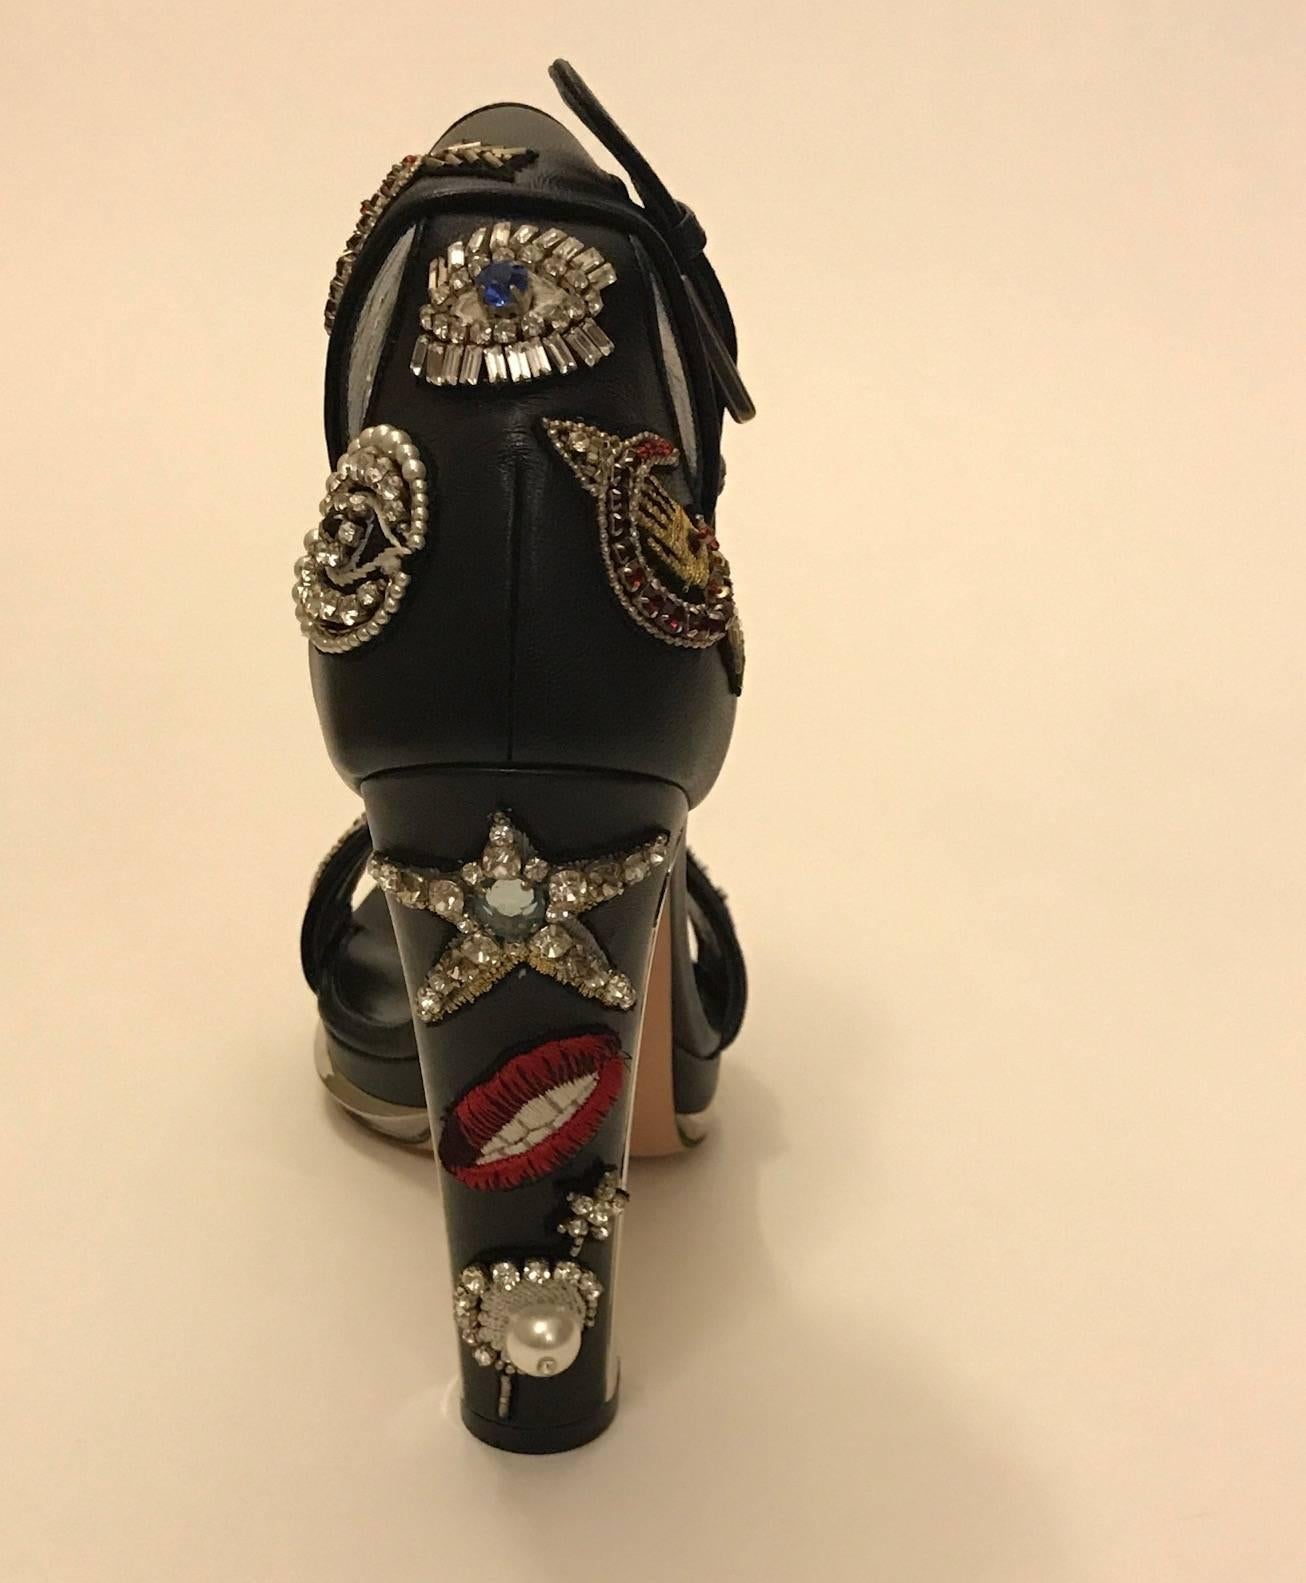 Alexander McQueen 'Obsession' sandal from Sarah Burton's Fall 2016 collection. Black lambskin leather with embroidered good luck charms and dream symbols accented with crystal rhinestones. Mirrored detail at heels and front. Ankle straps with